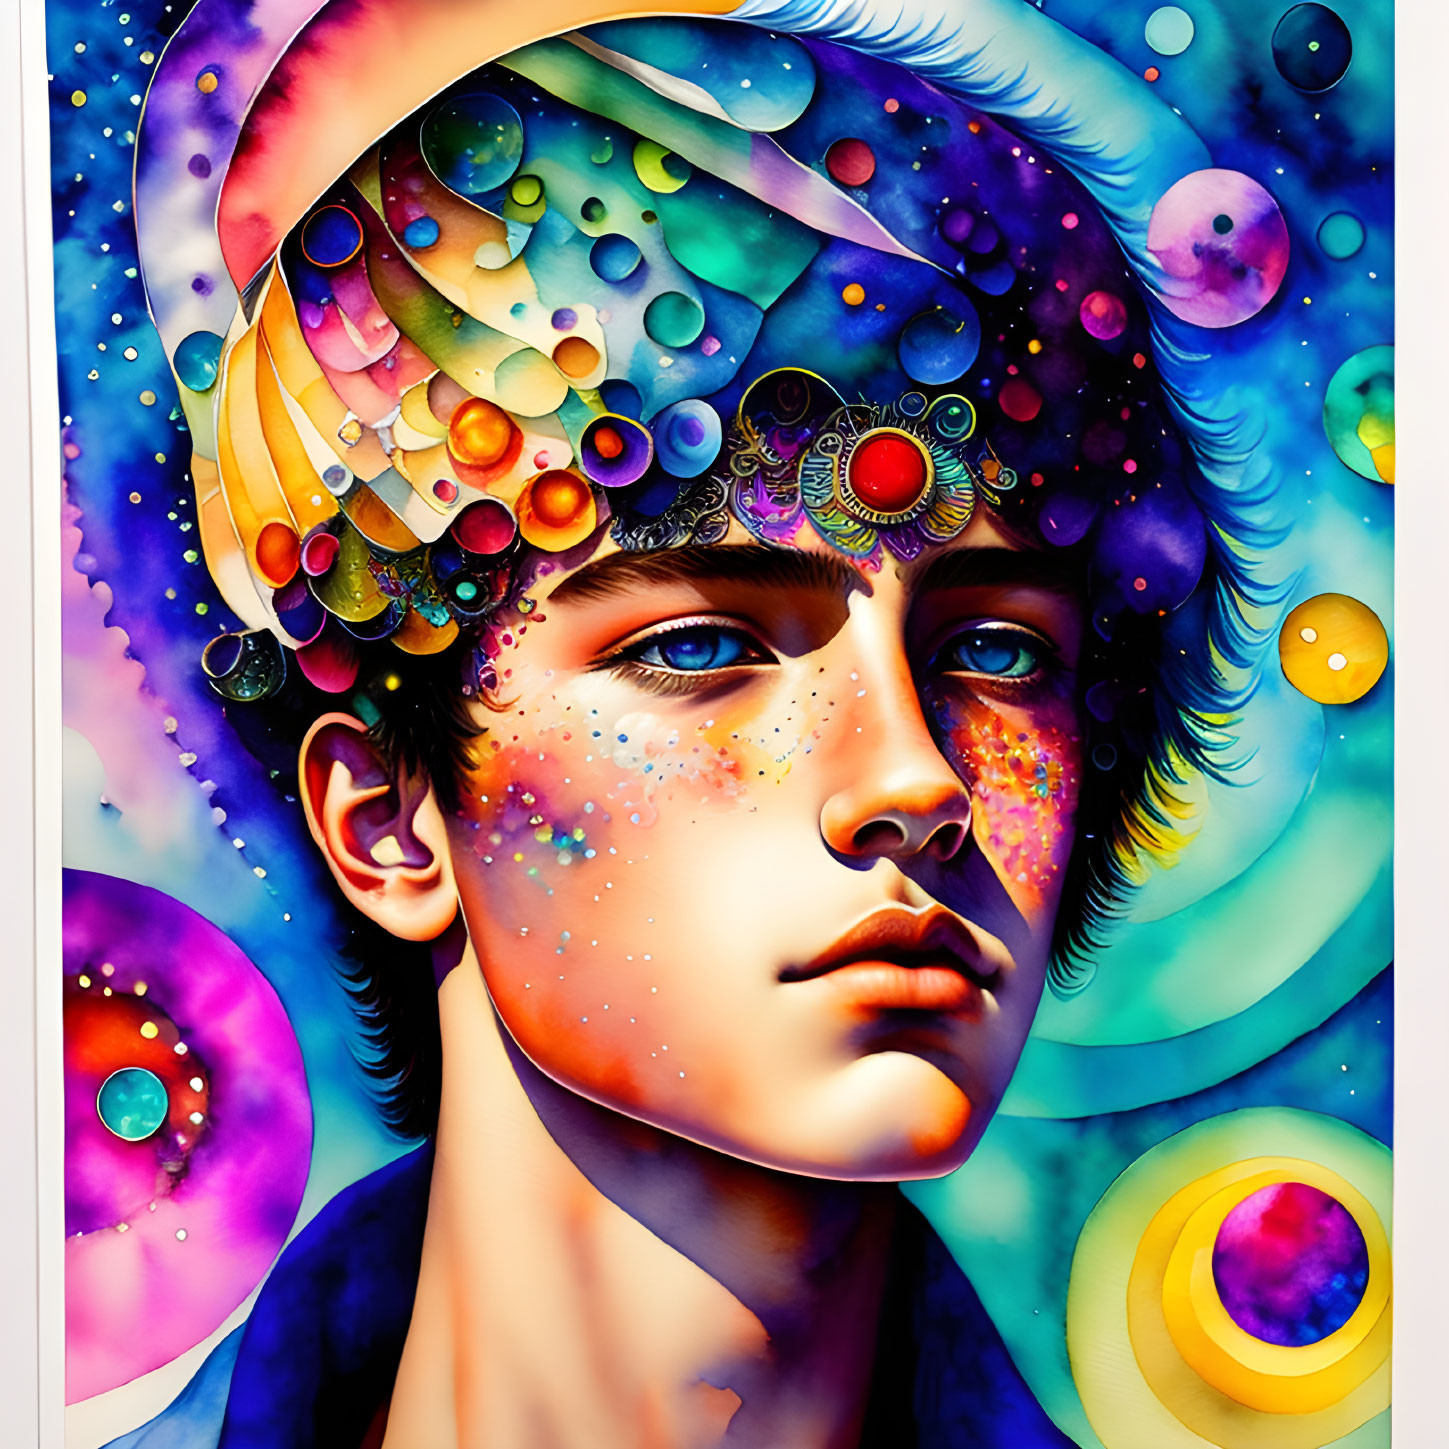 Colorful portrait featuring cosmic and psychedelic elements